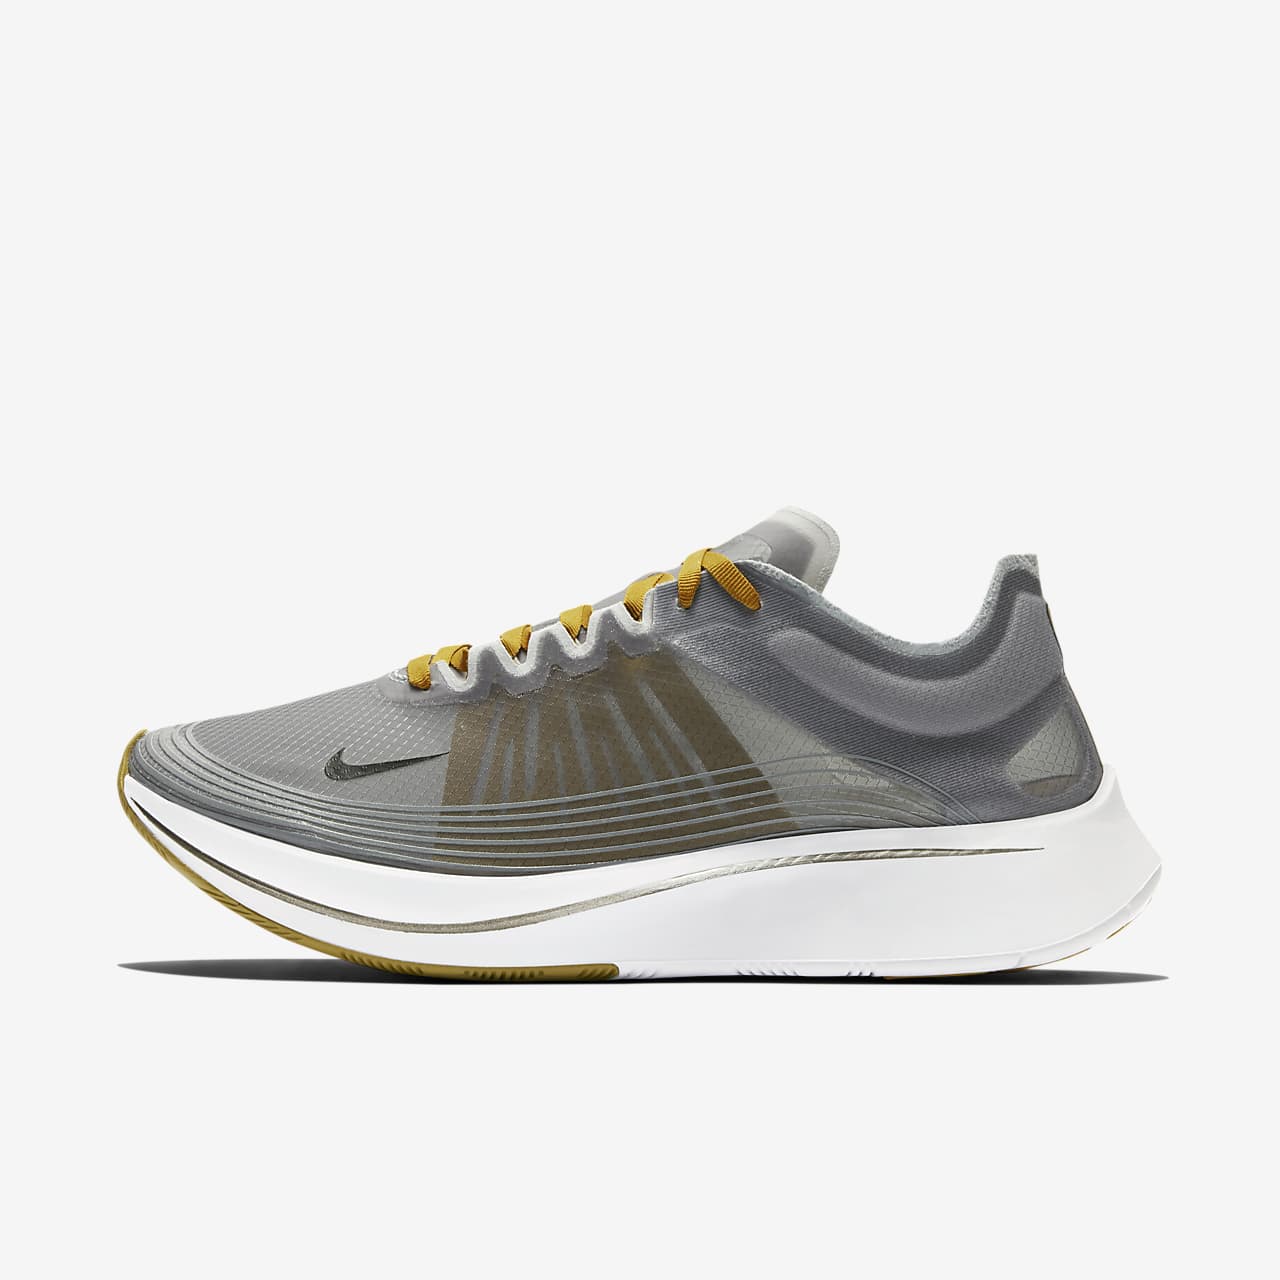 nike zoom fly sp size